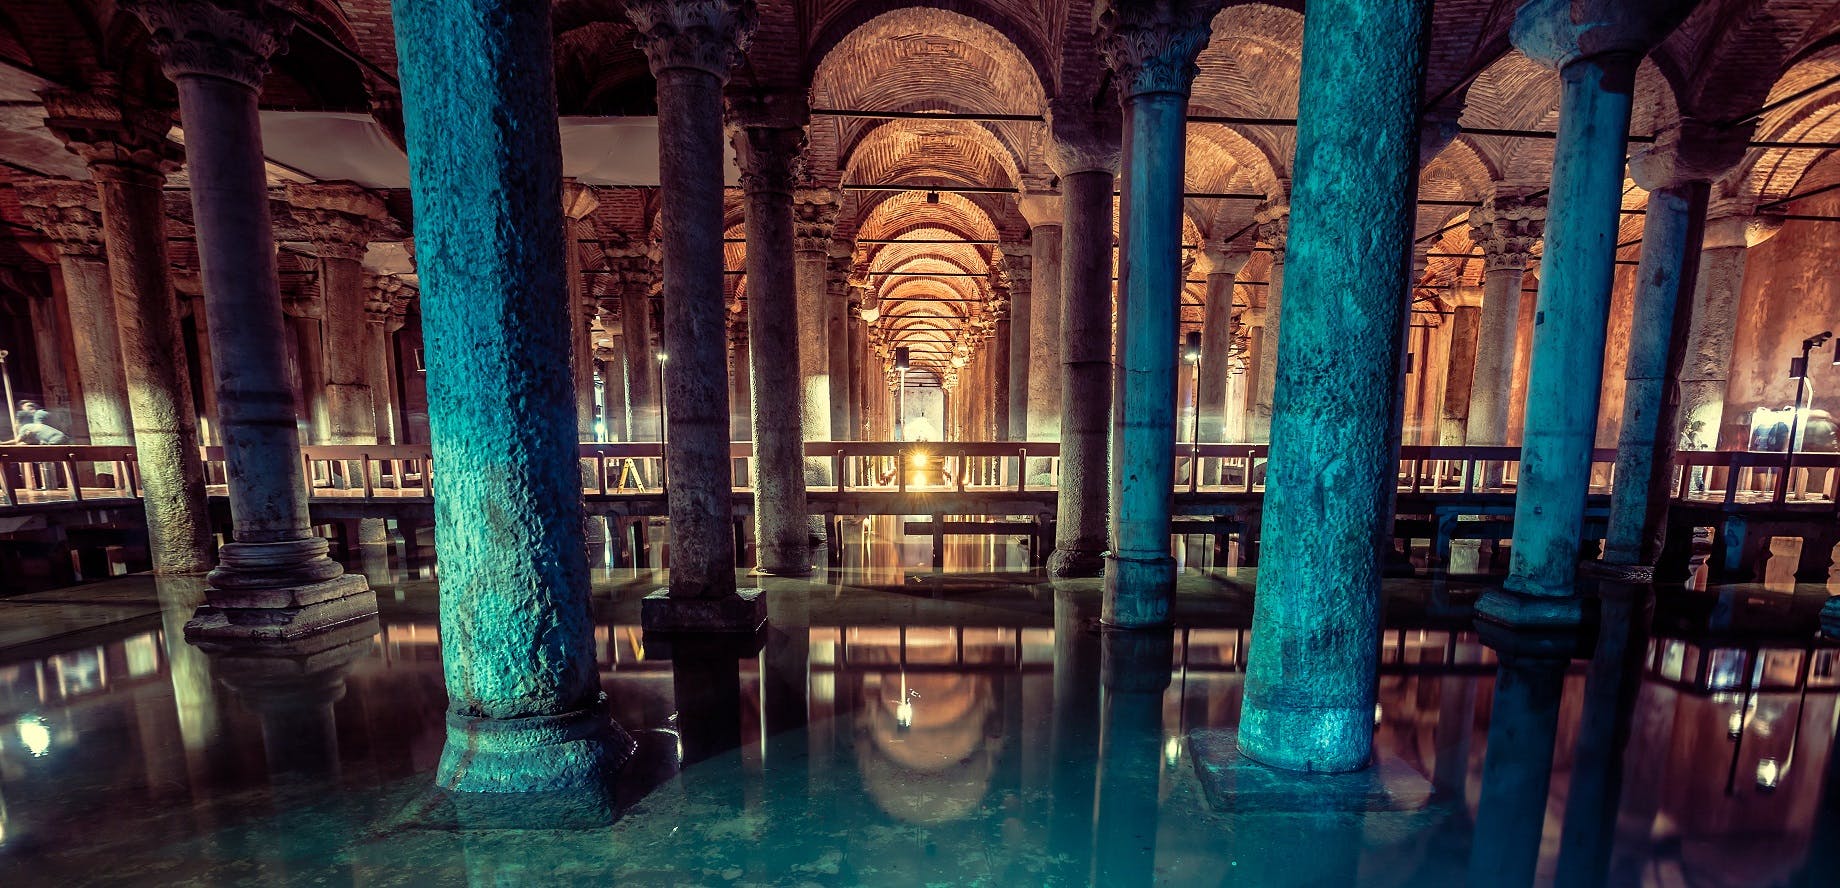 Skip the line ticket and guided tour to Basilica Cistern in Istanbul